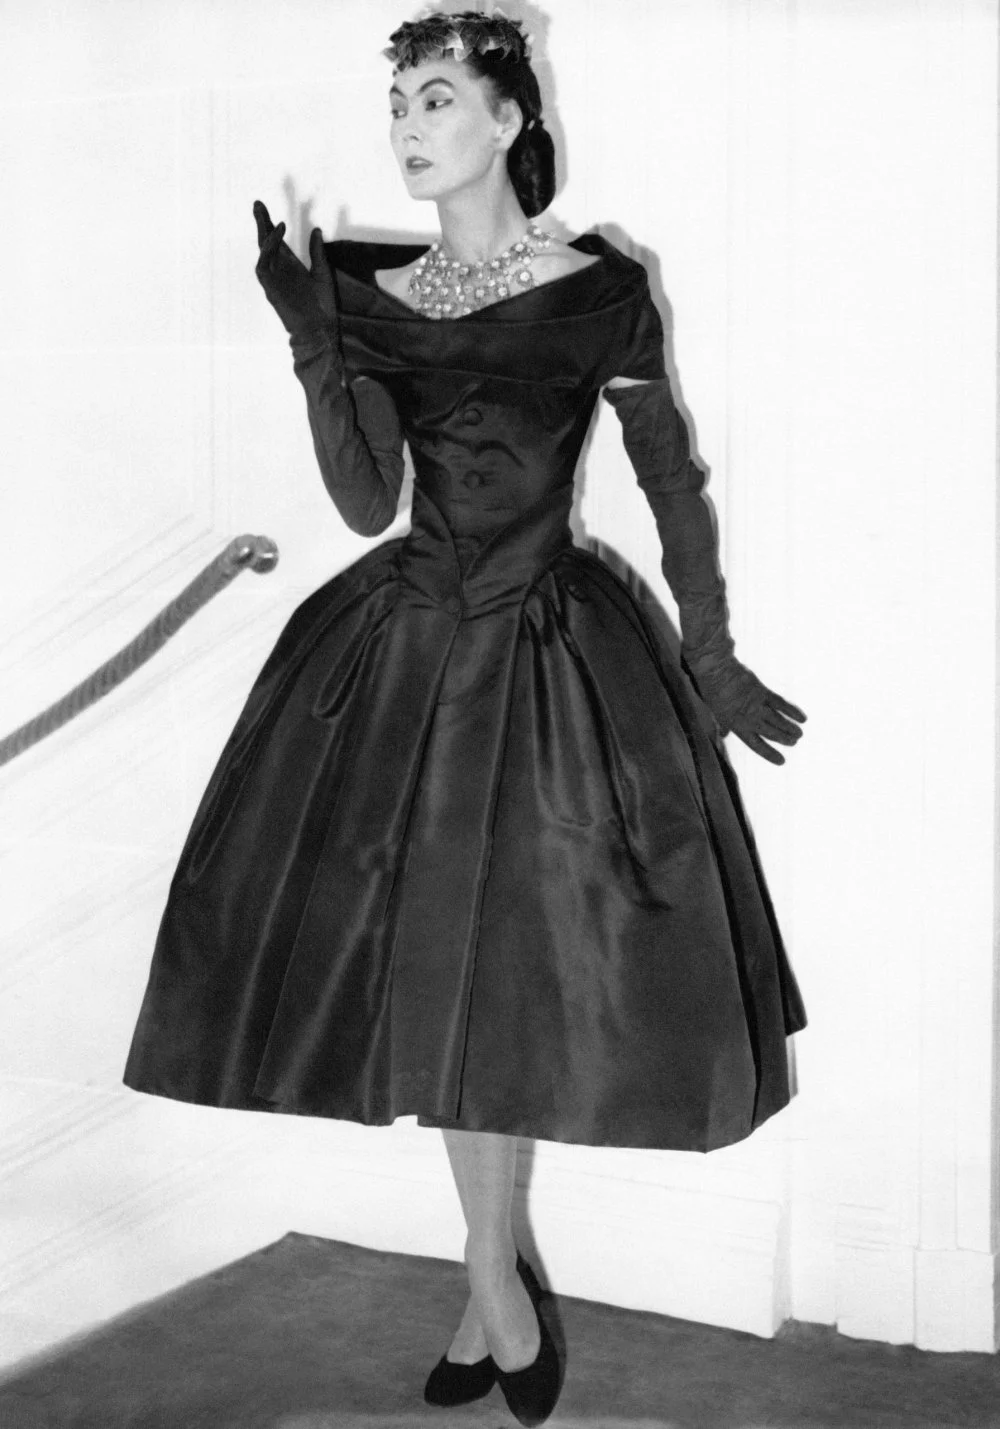 Alla. Autumn collection of Christian Dior. Paris 1955./Getty Images